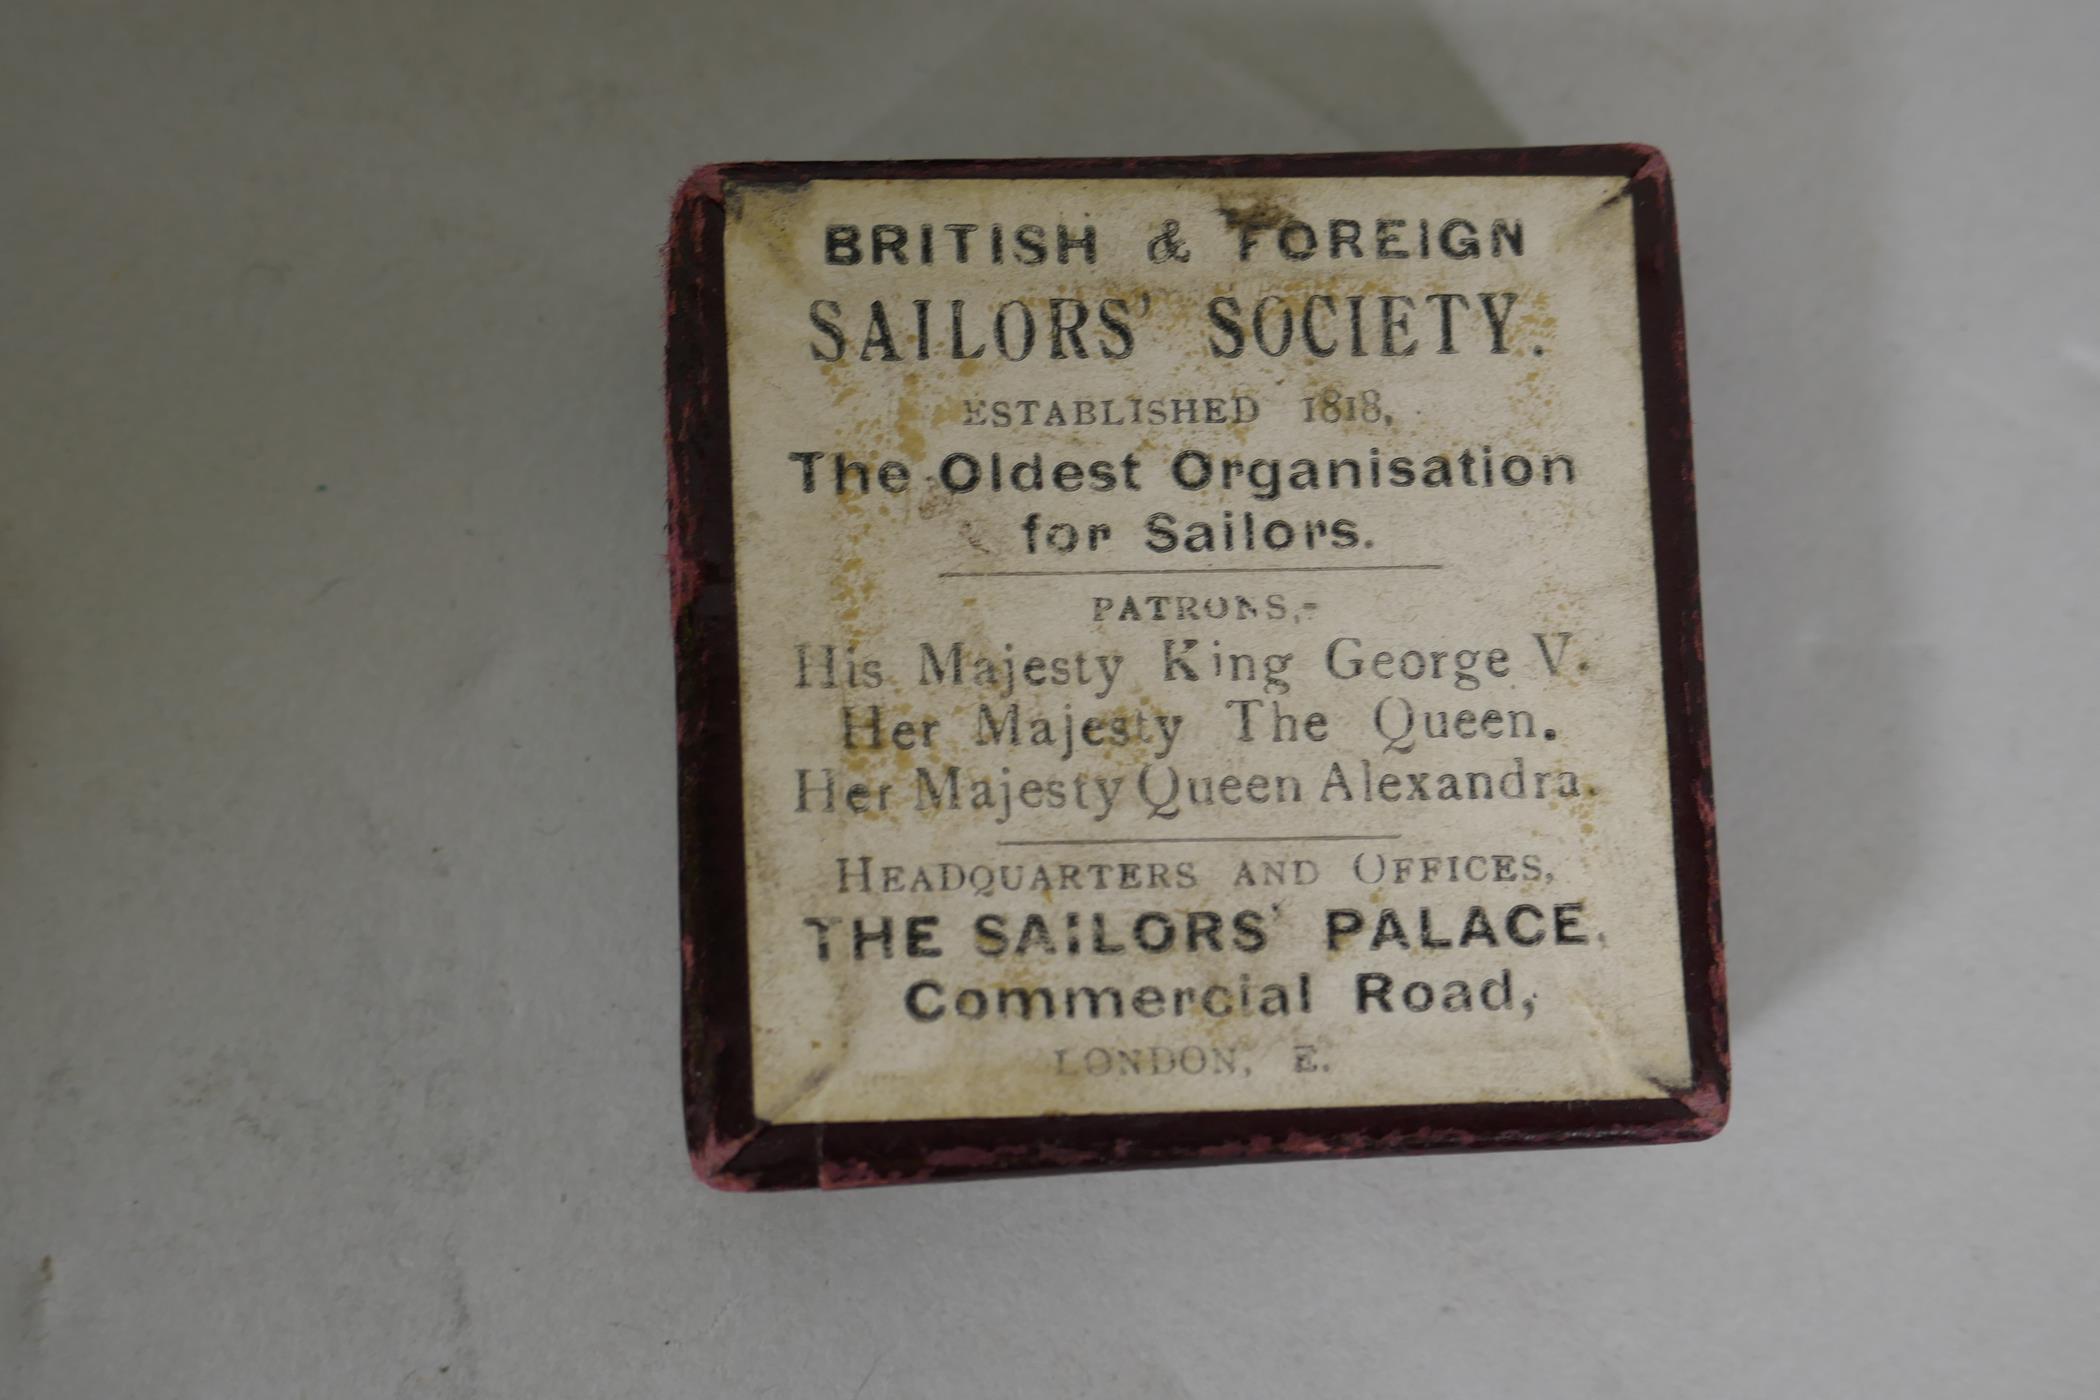 Admiral Lord Nelson memorabilia, a souvenir medal from the British and Foreign Sailor's Society, - Image 5 of 5